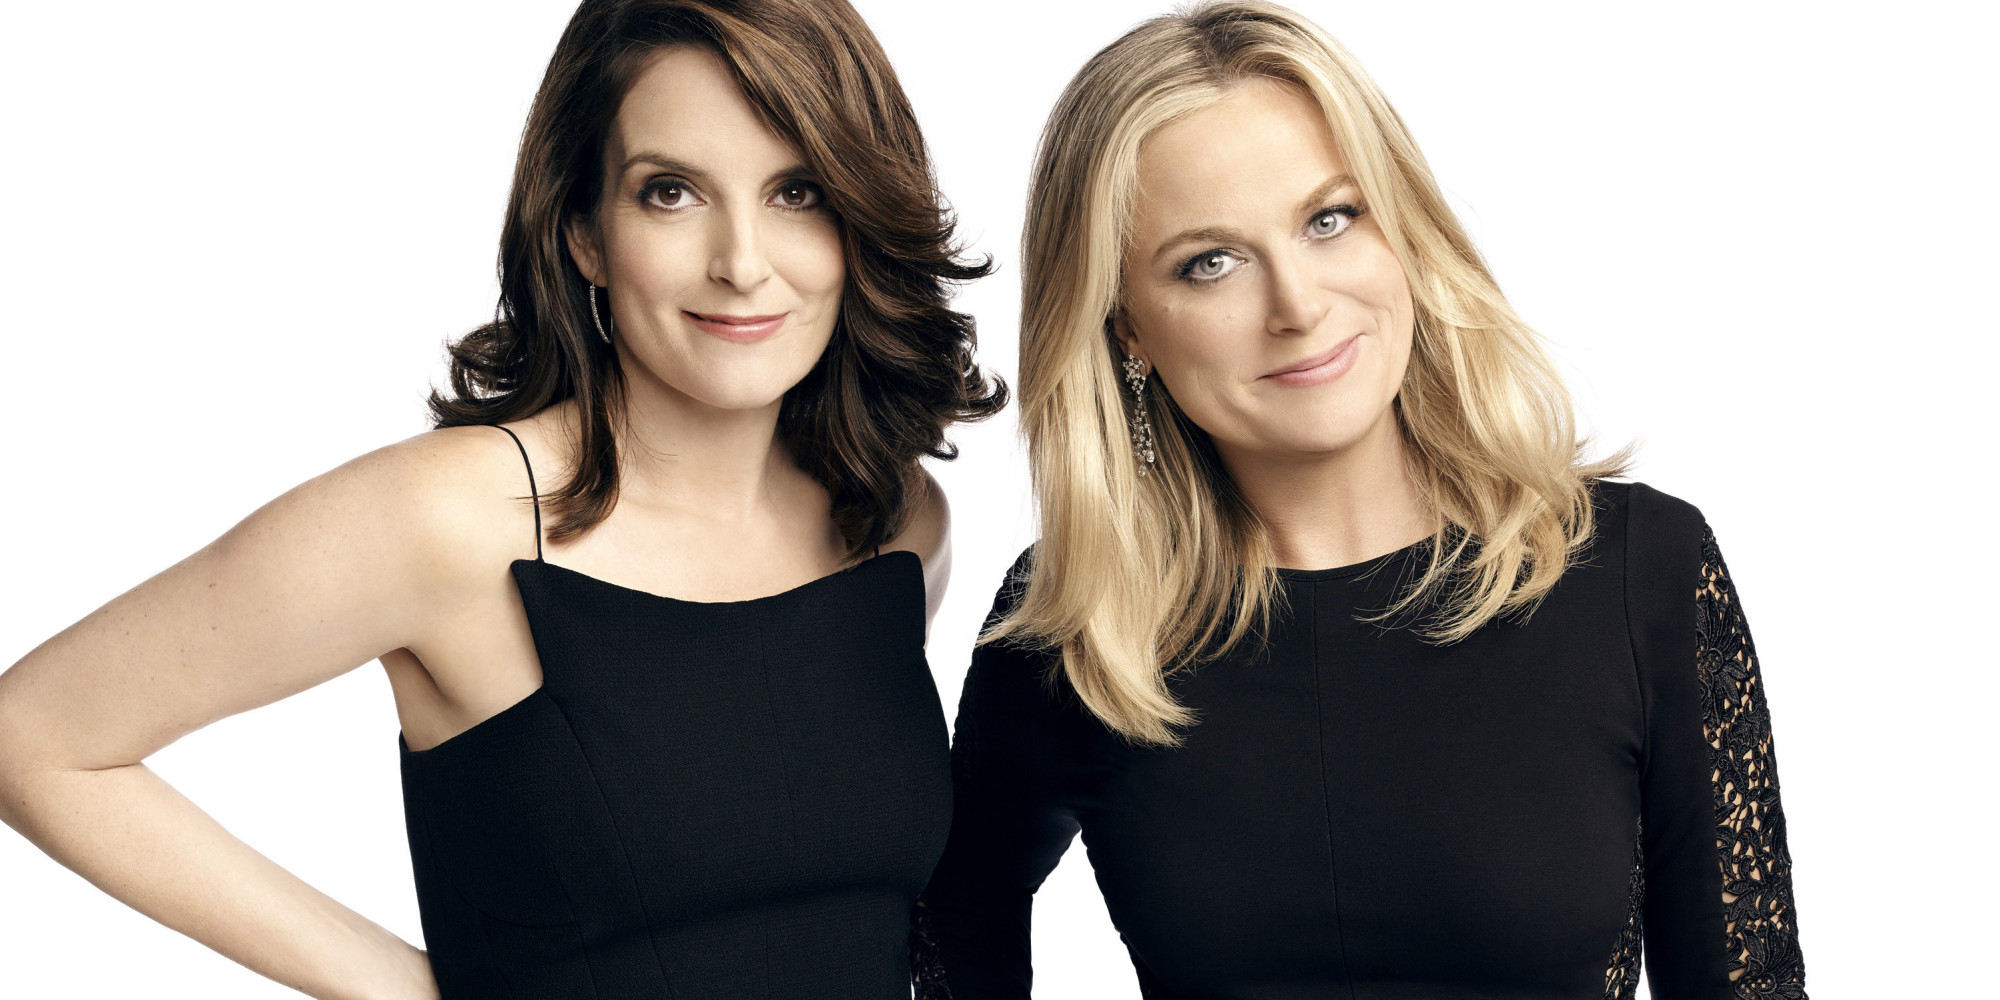 GOLDEN GLOBES -- 72nd Annual Golden Globe Awards -- Pictured: (l-r) Tina Fey, Amy Poehler -- (Photo by: Art Streiber/NBC/NBCU Photo Bank via Getty Images)